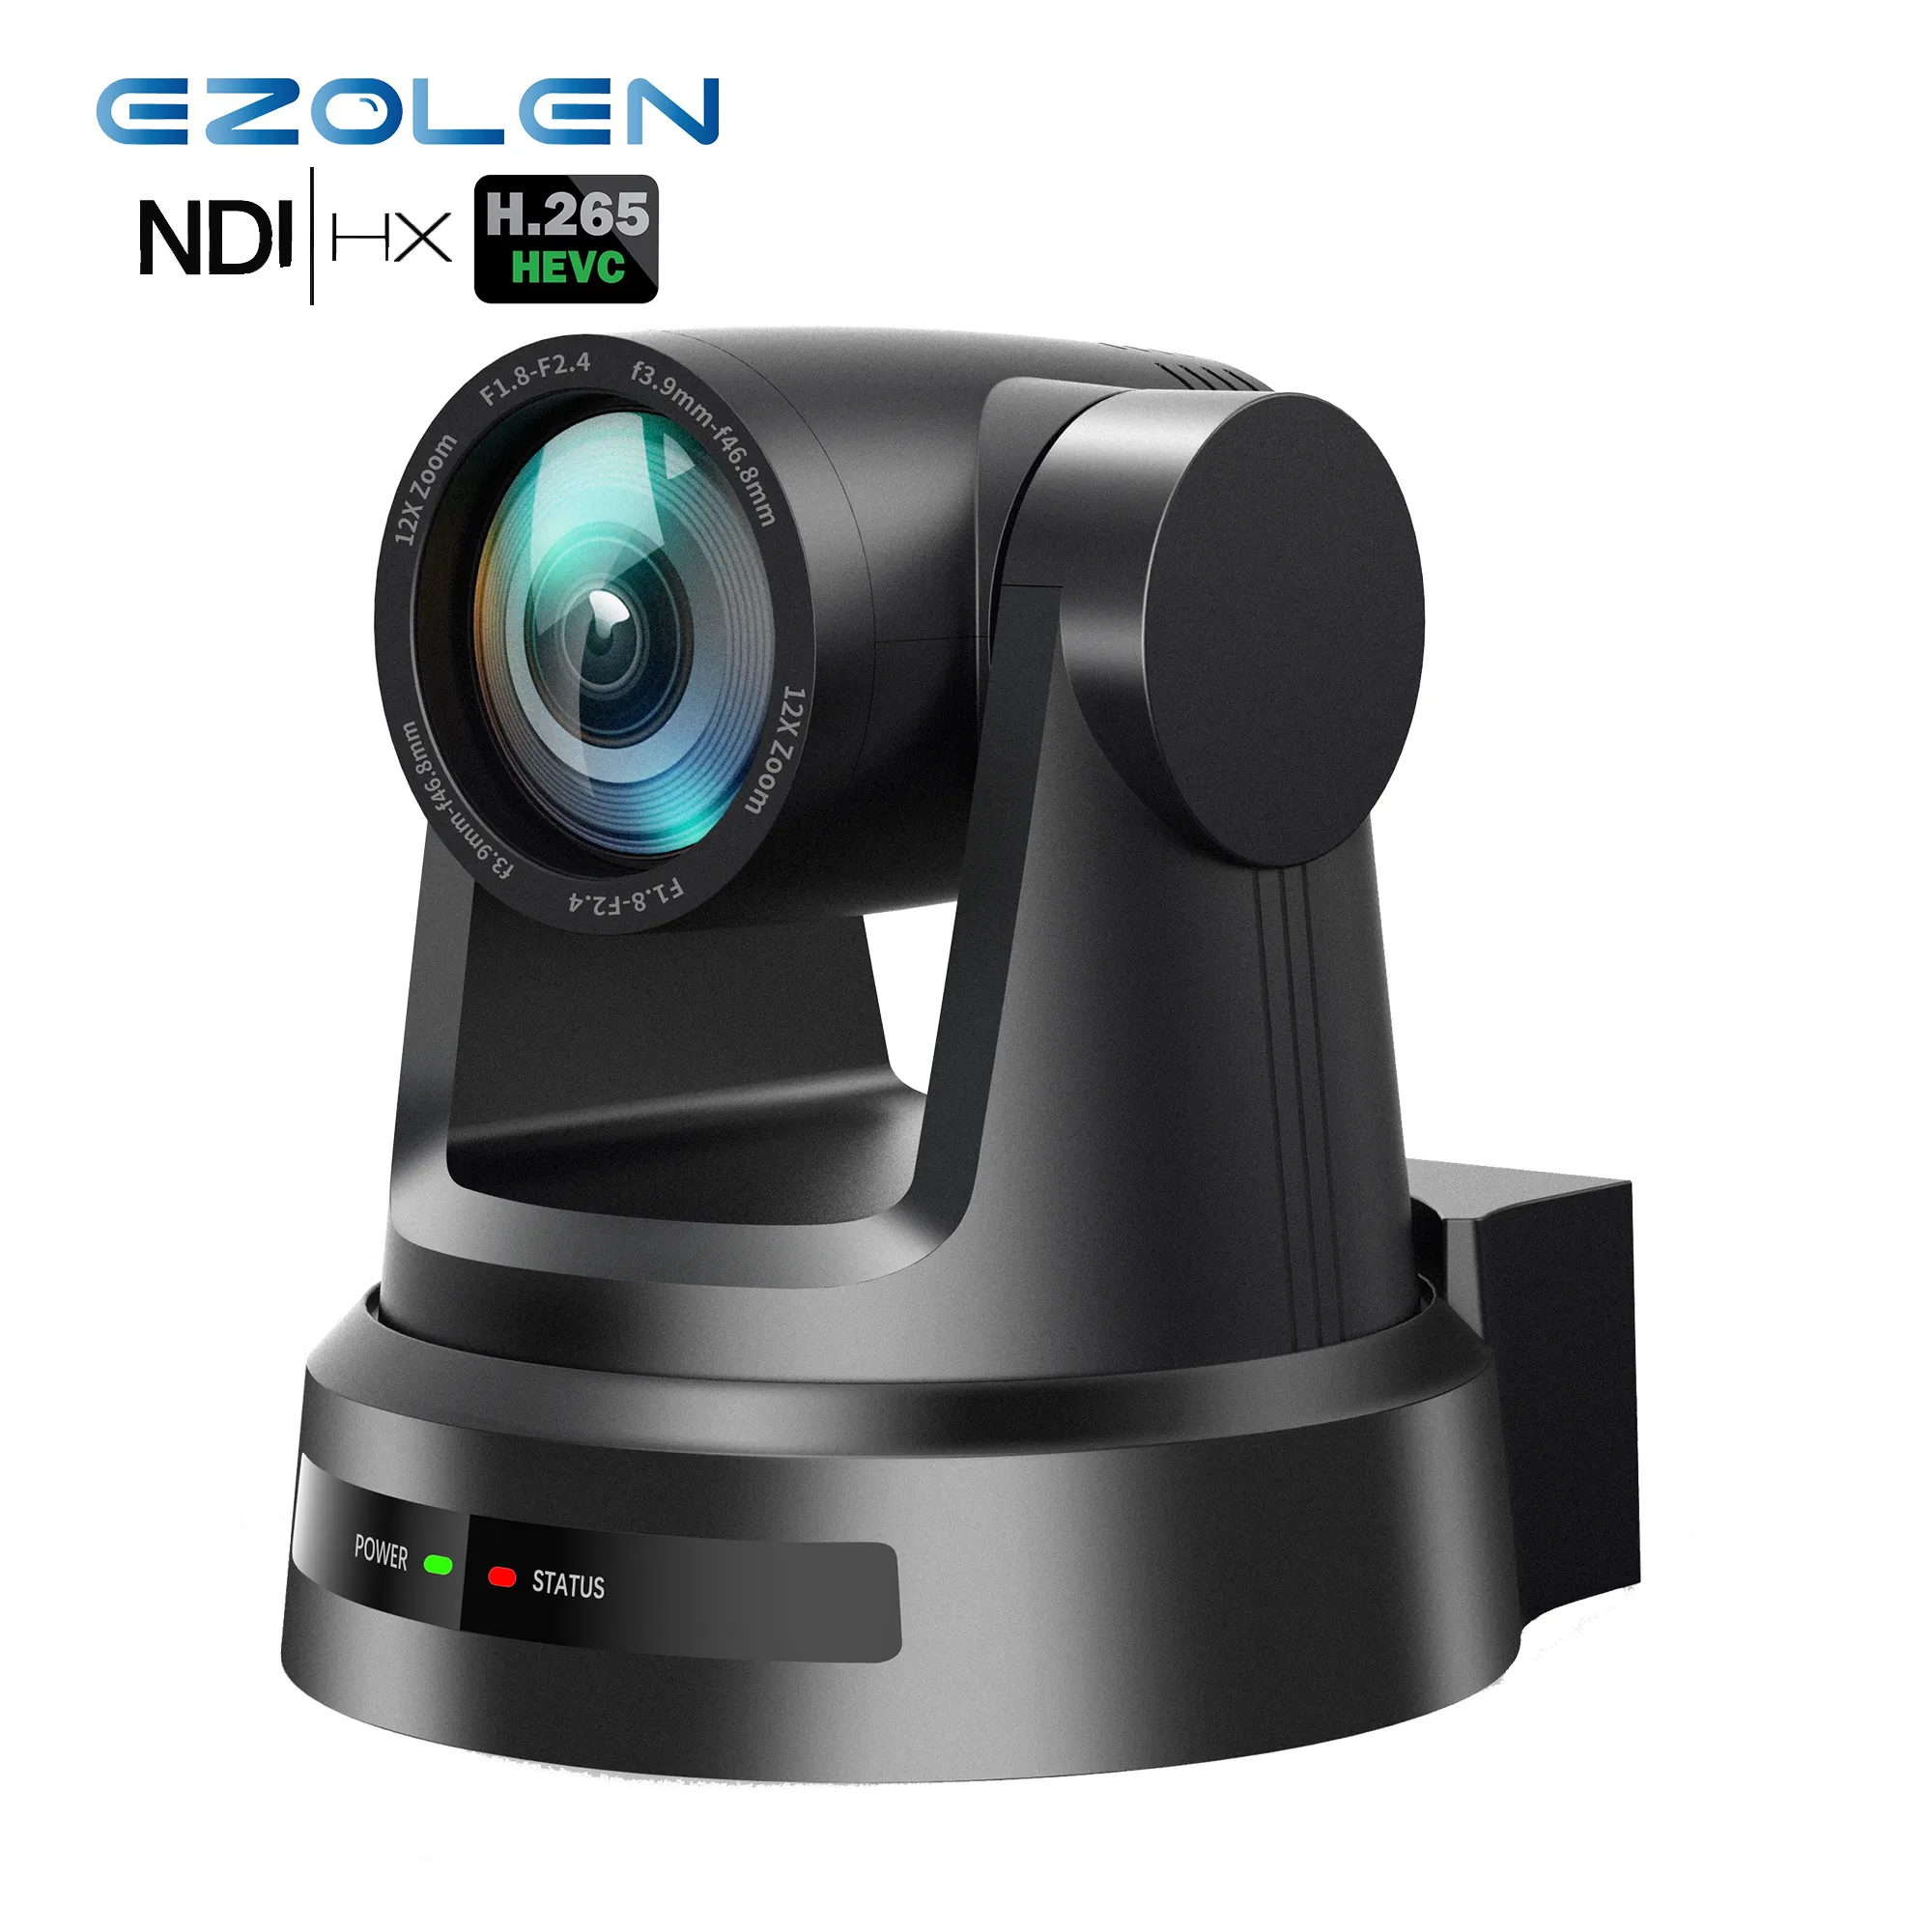 Youtube Stream Use Indoor Ndi Beauty Camera Auto Track Vlogging Webcam Digital Video Ptz Zoom Camera for Conference from EZOLEN